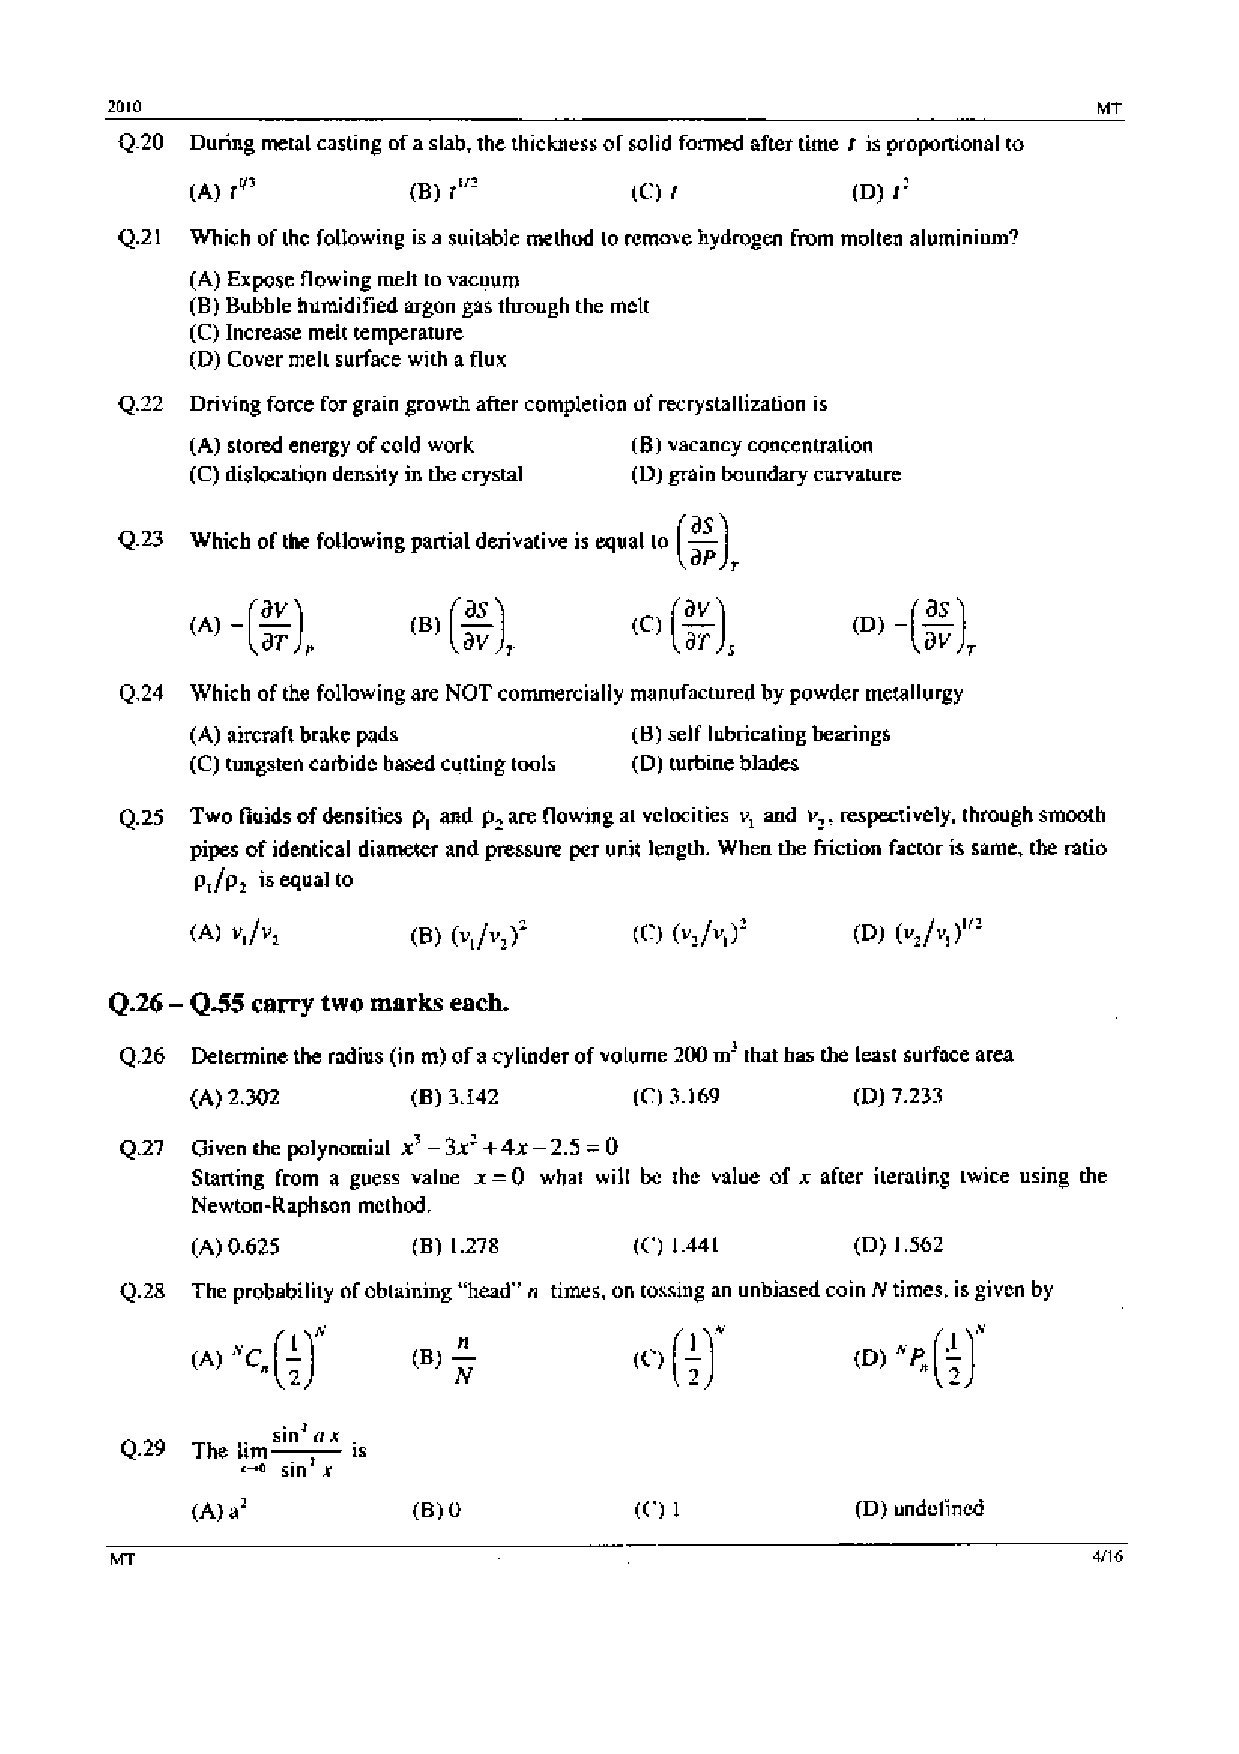 GATE Exam Question Paper 2010 Metallurgical Engineering 4